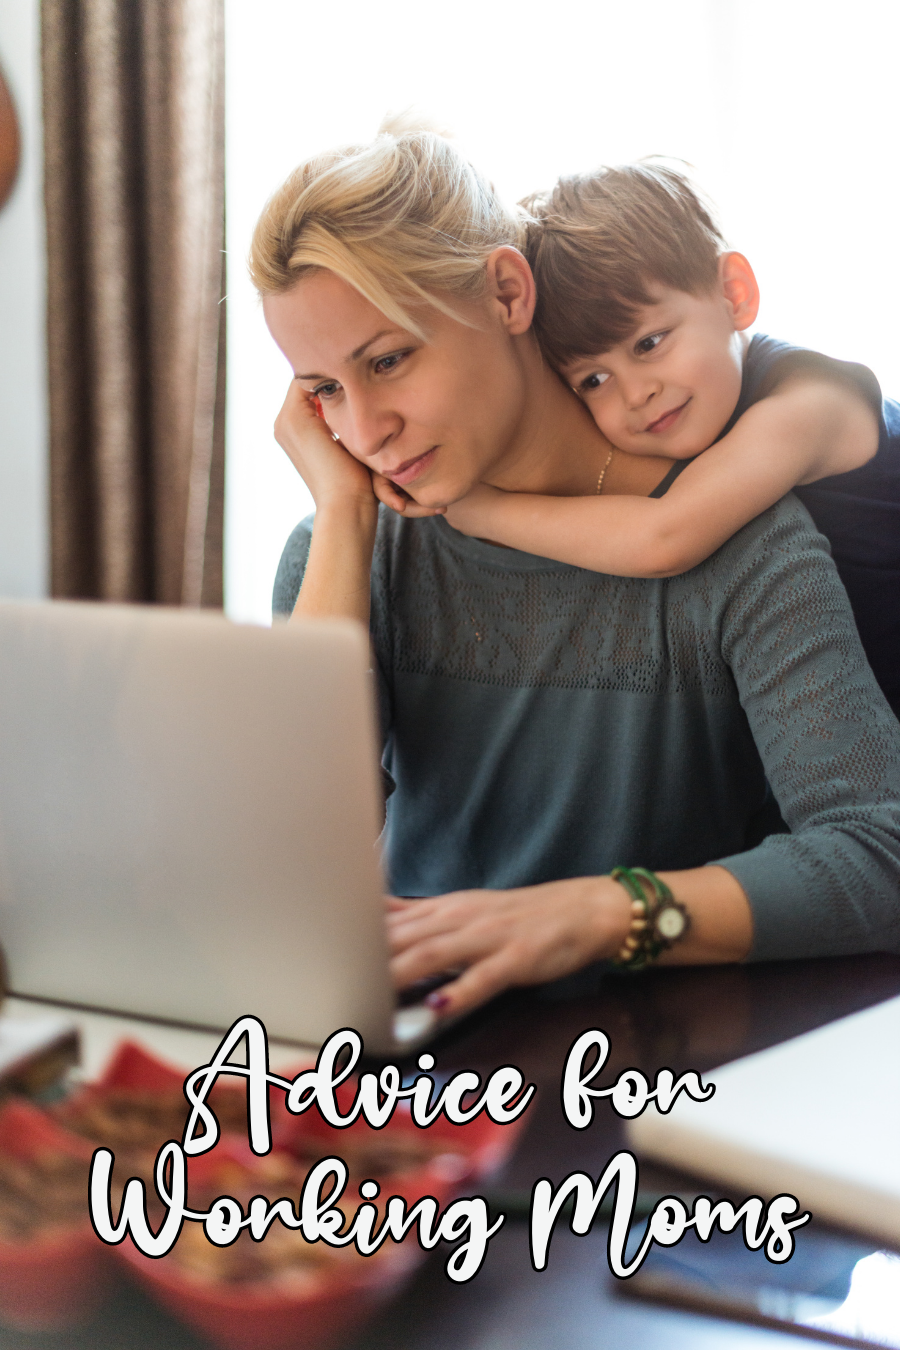 Advice for Working Moms